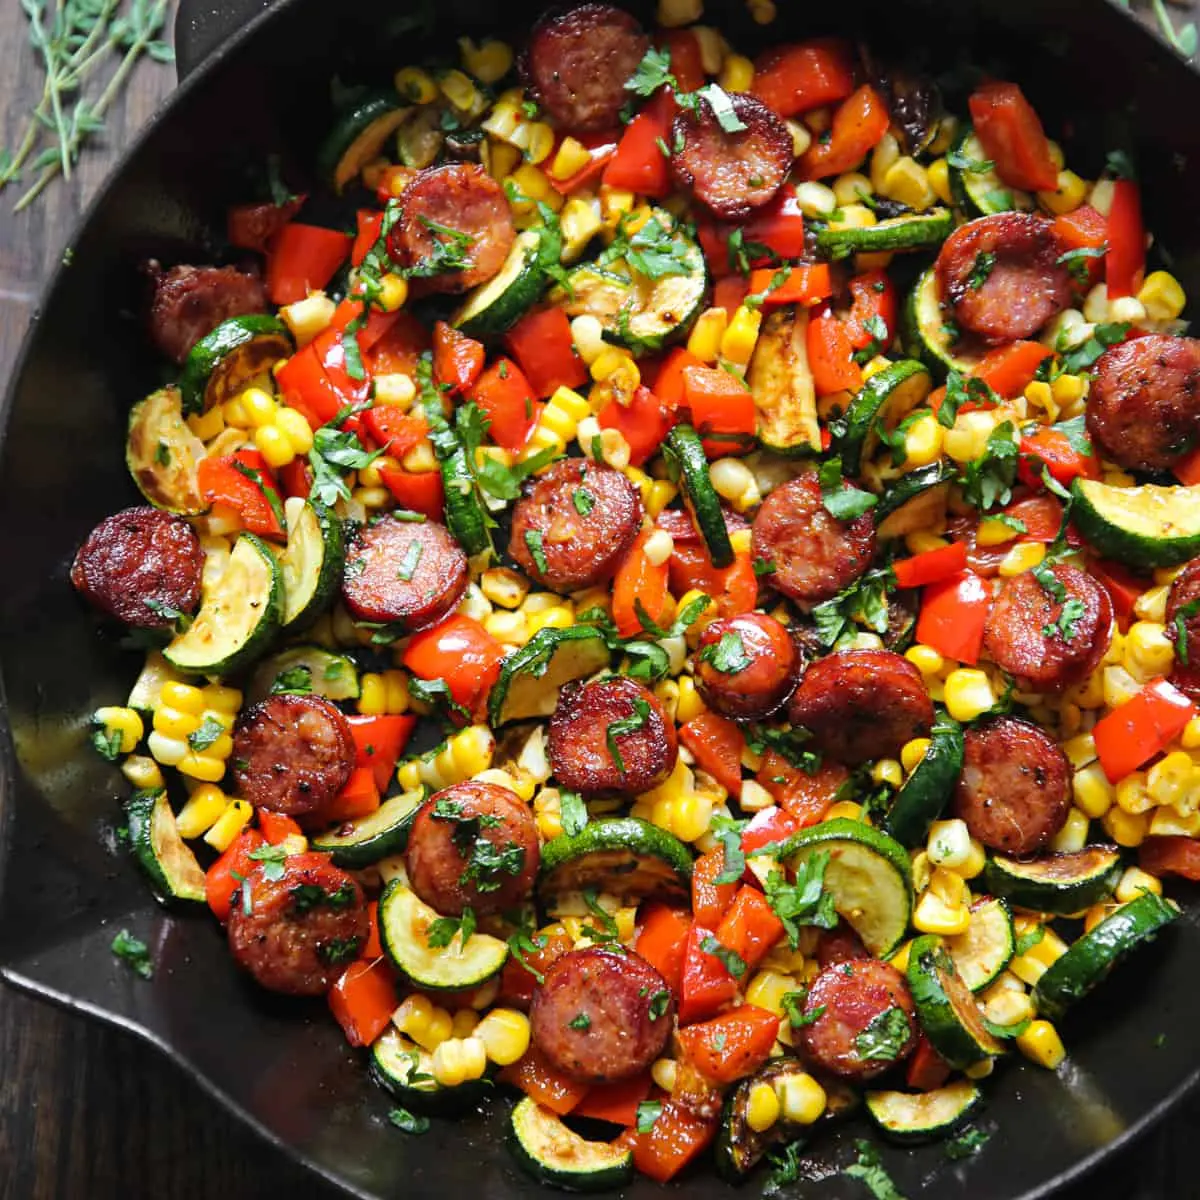 smoked sausage with vegetables - Which vegetables go well with sausage